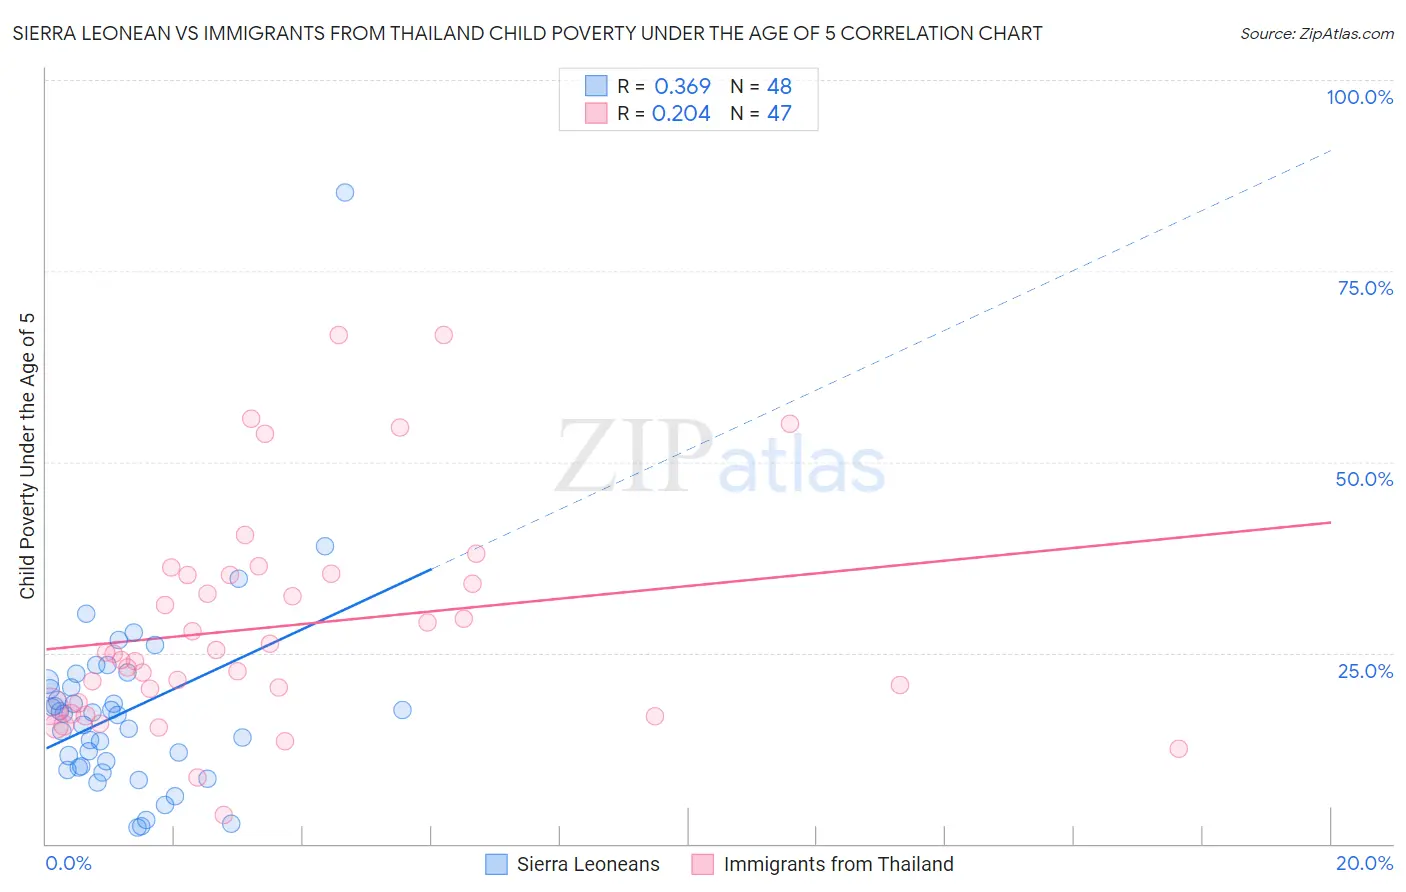 Sierra Leonean vs Immigrants from Thailand Child Poverty Under the Age of 5